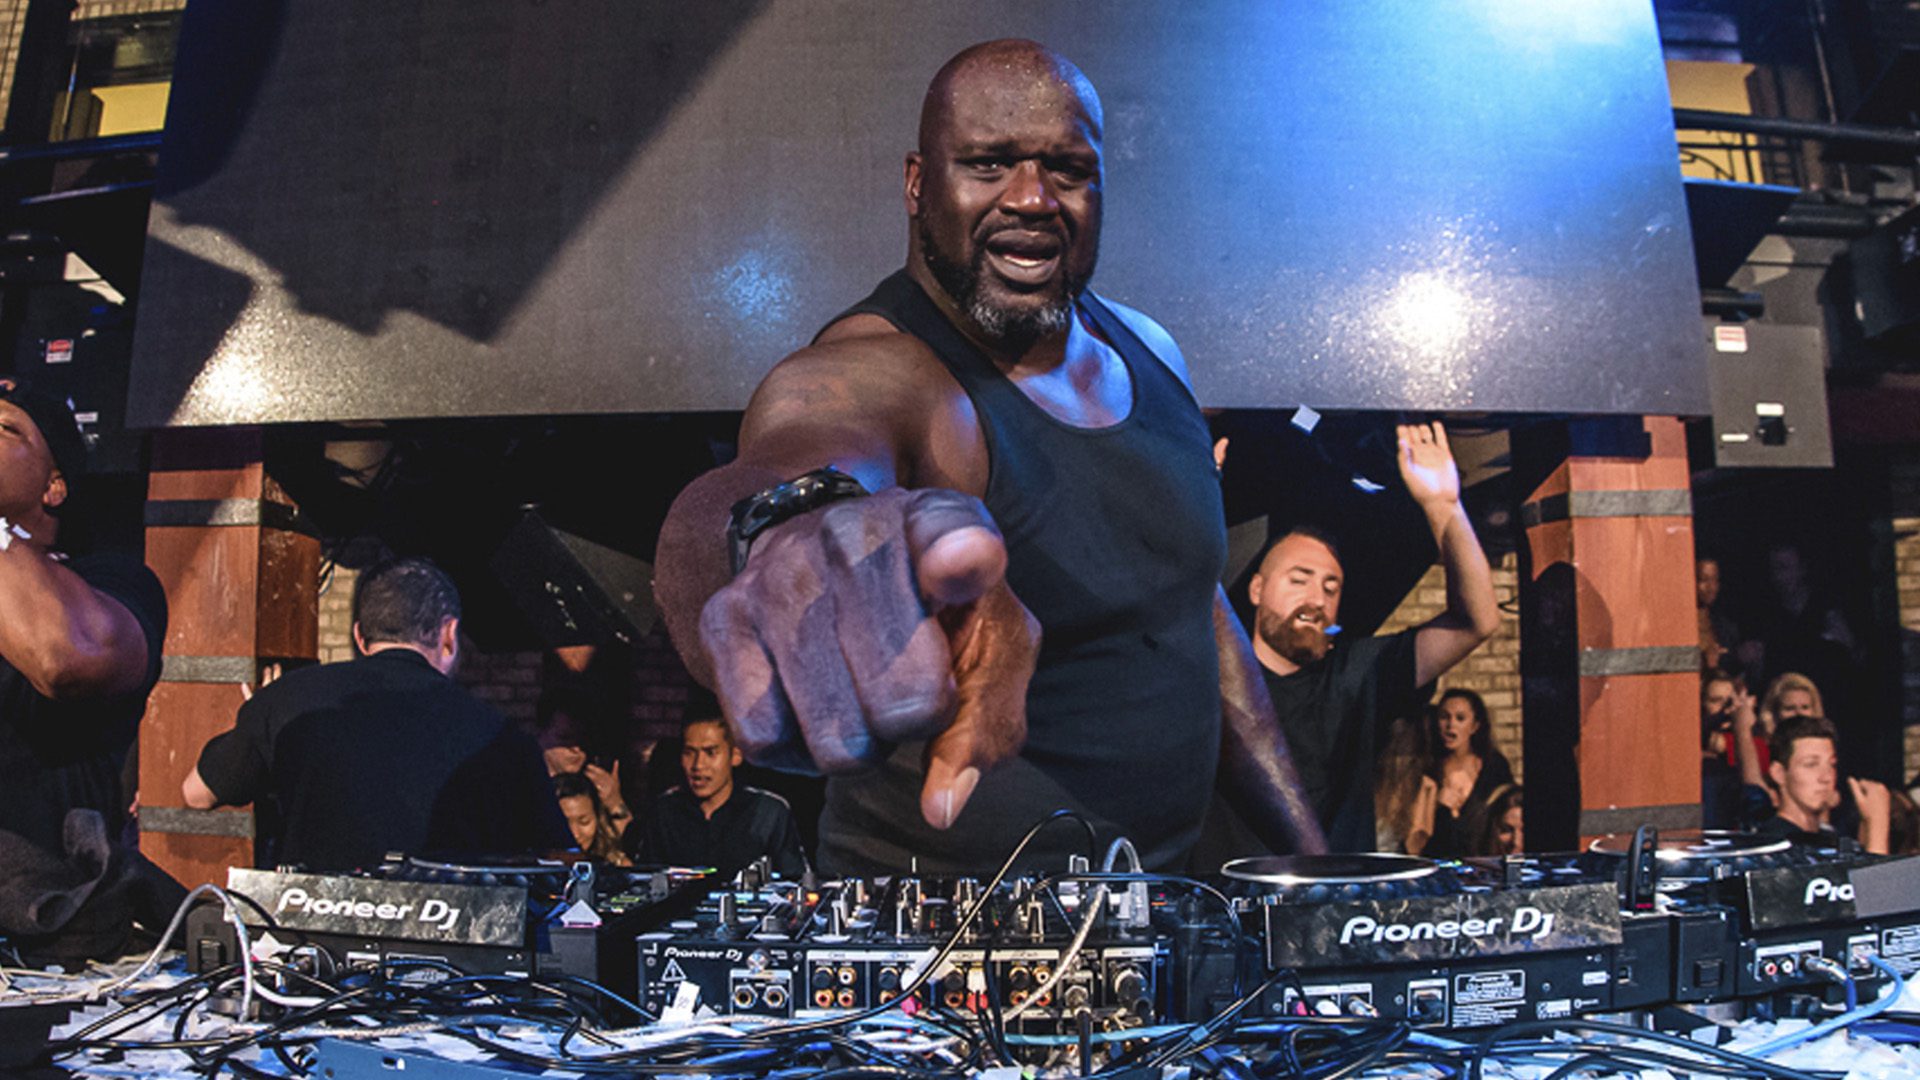 Shaq’s DJing Gets Hilariously Ripped By Music Critic